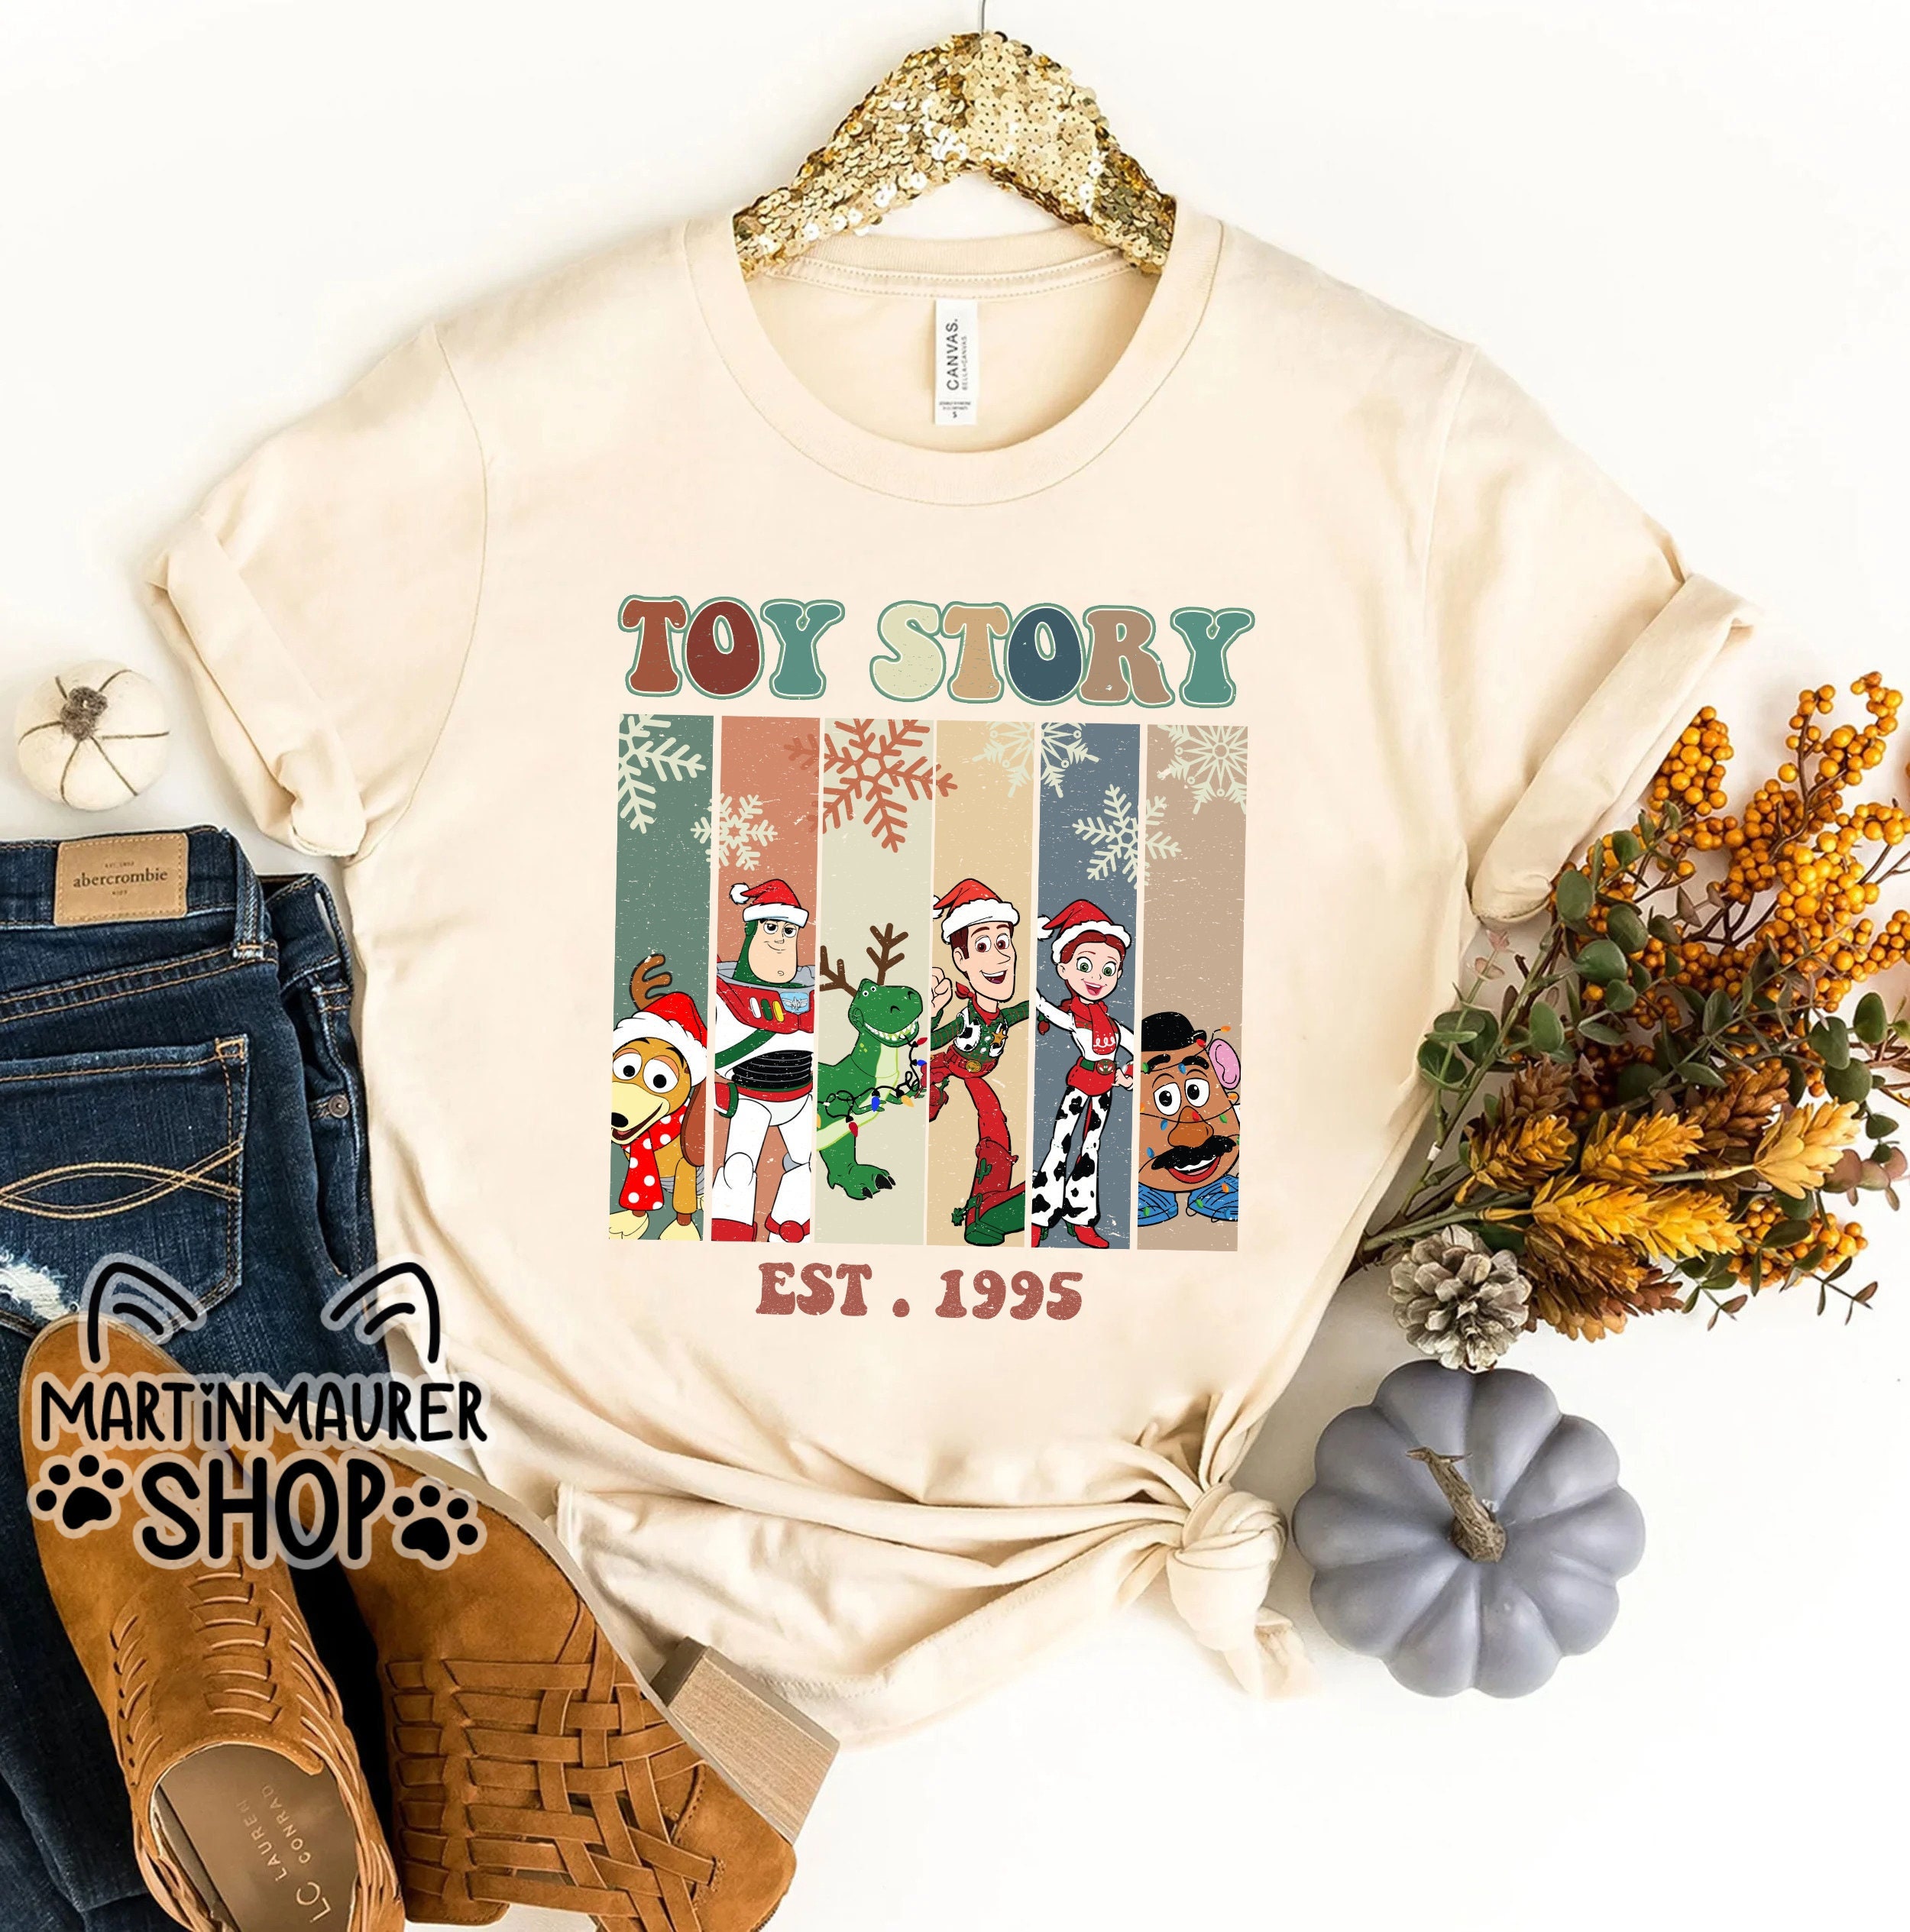 Discover Vintage Toy Story Christmas, Toy Story Charaktere Weihnachts T-Shirt